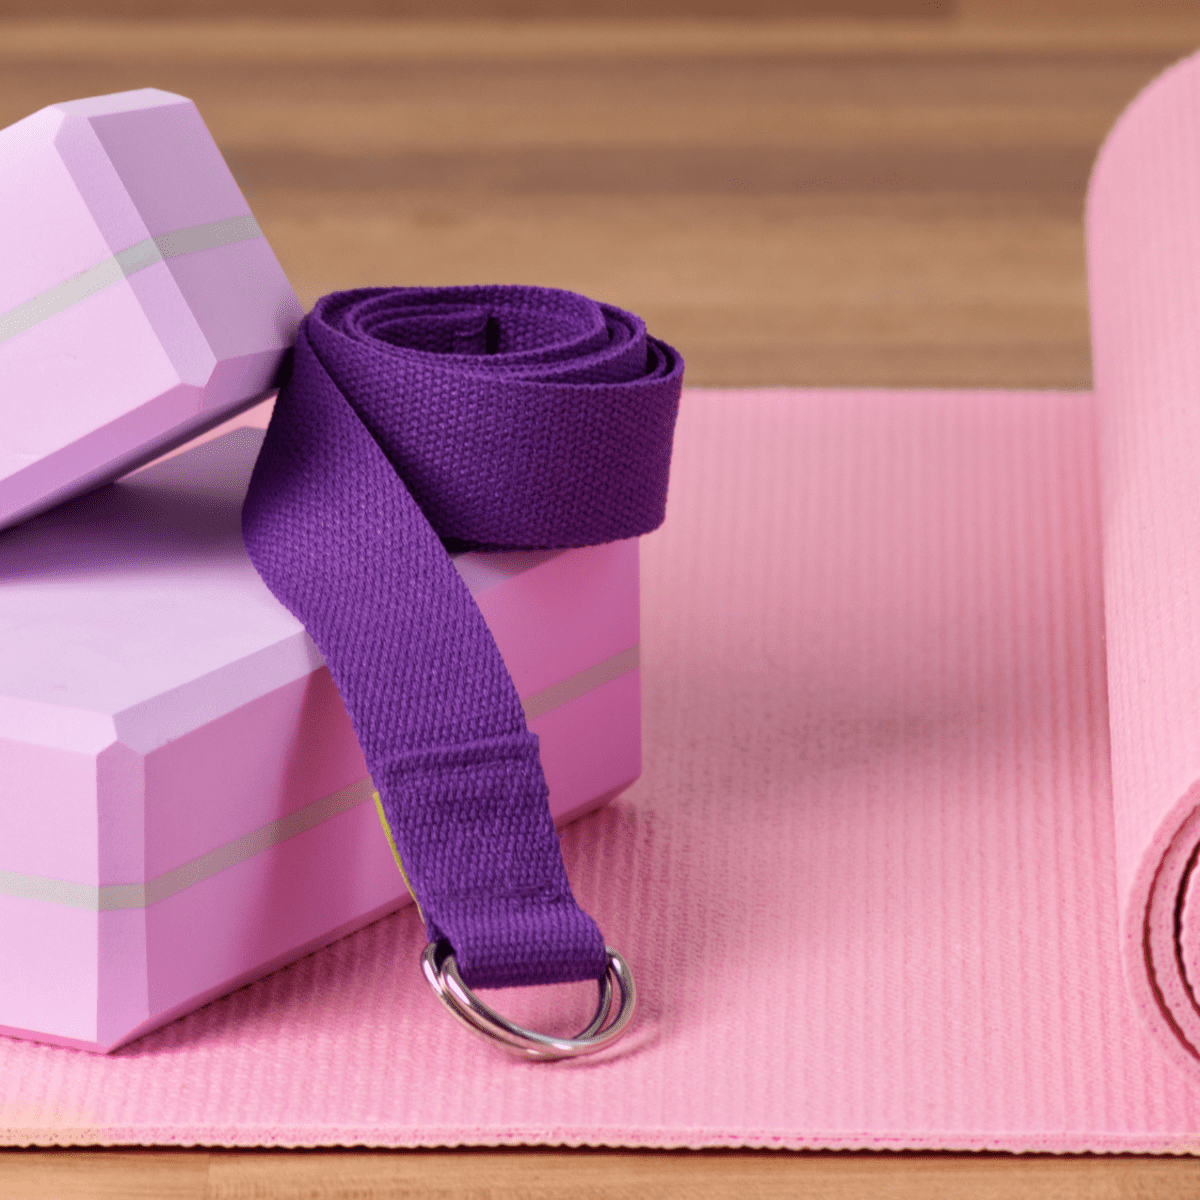 The Benefits Of Using Yoga Props To Deepen Your Practice ​